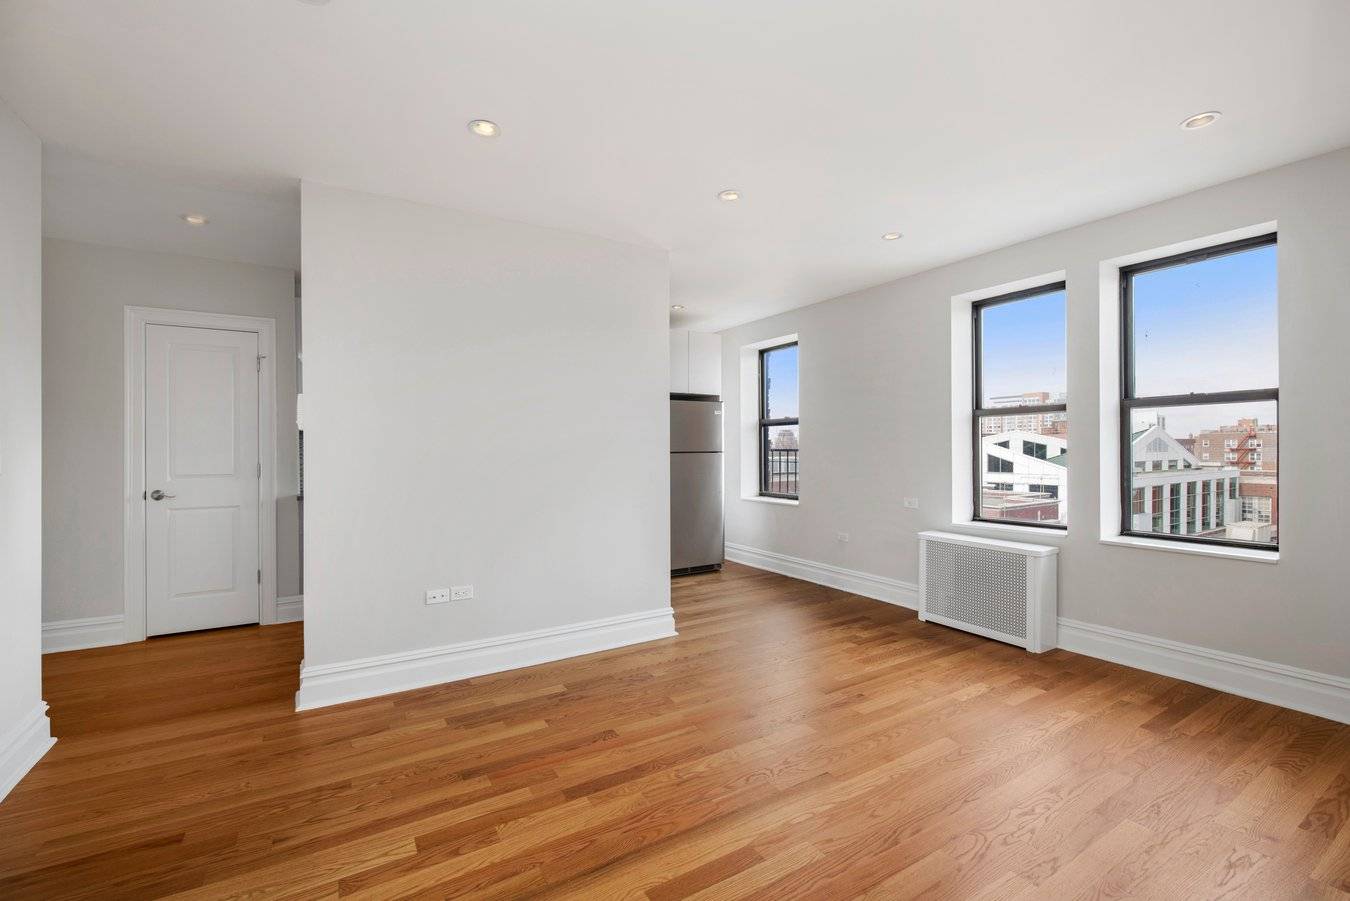 Modern, gut renovated one bedroom, one bath apartment featuring new oak hardwood floors, a large living room, separate kitchen with Quartz counter tops, abundant cabinet space, stainless steel appliances and ...